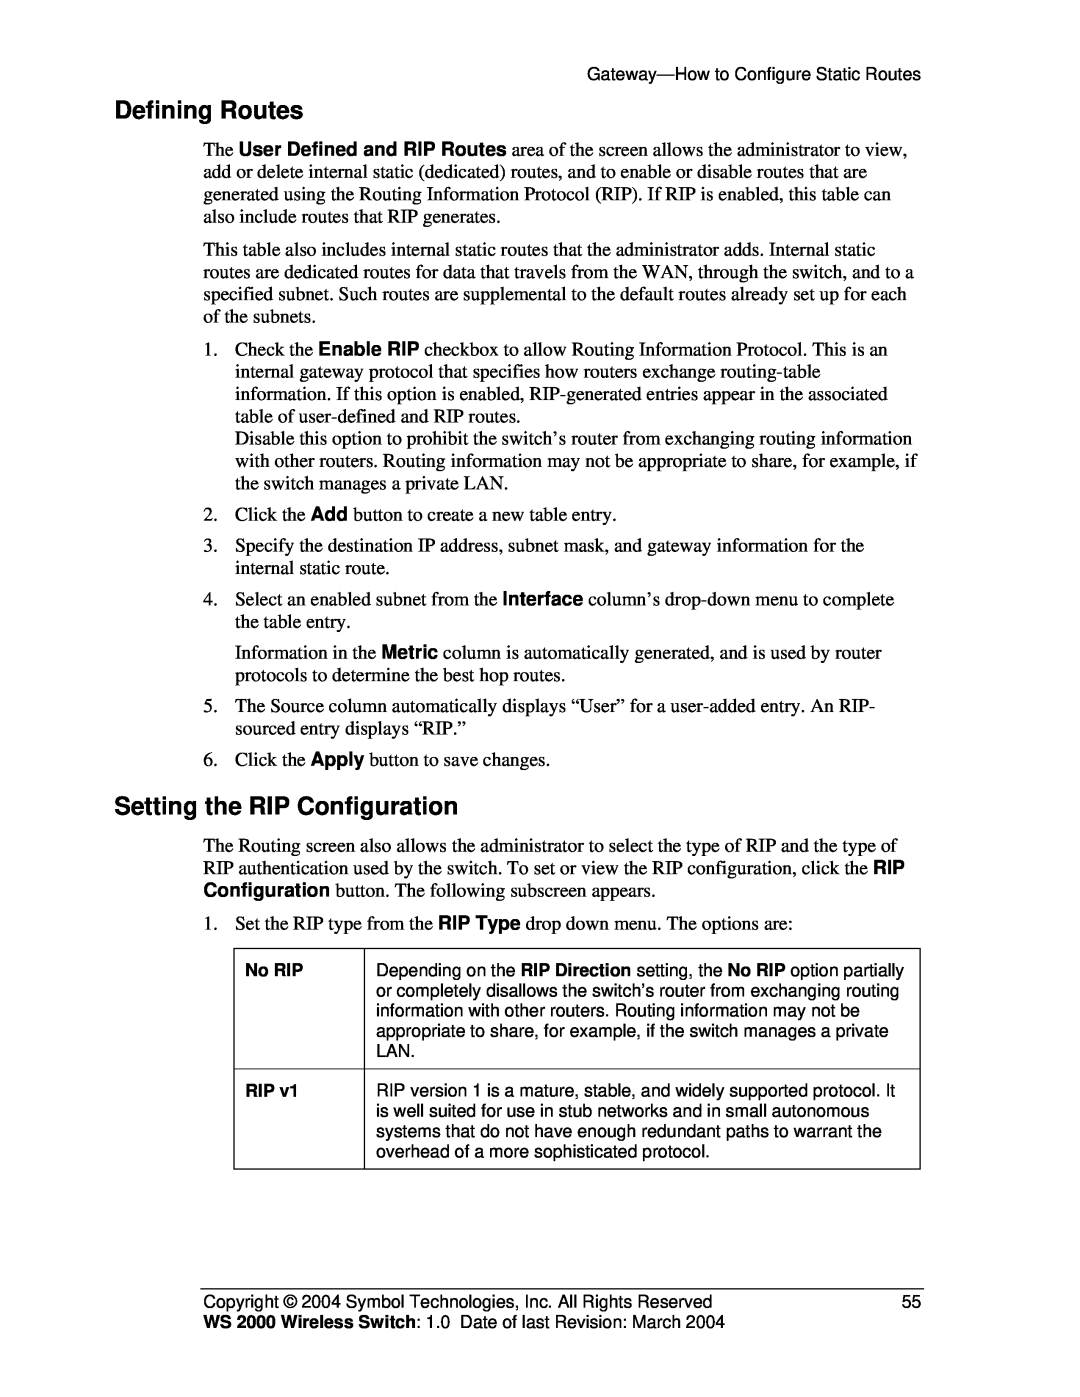 Symbol Technologies WS 2000 manual Defining Routes, Setting the RIP Configuration, No RIP 